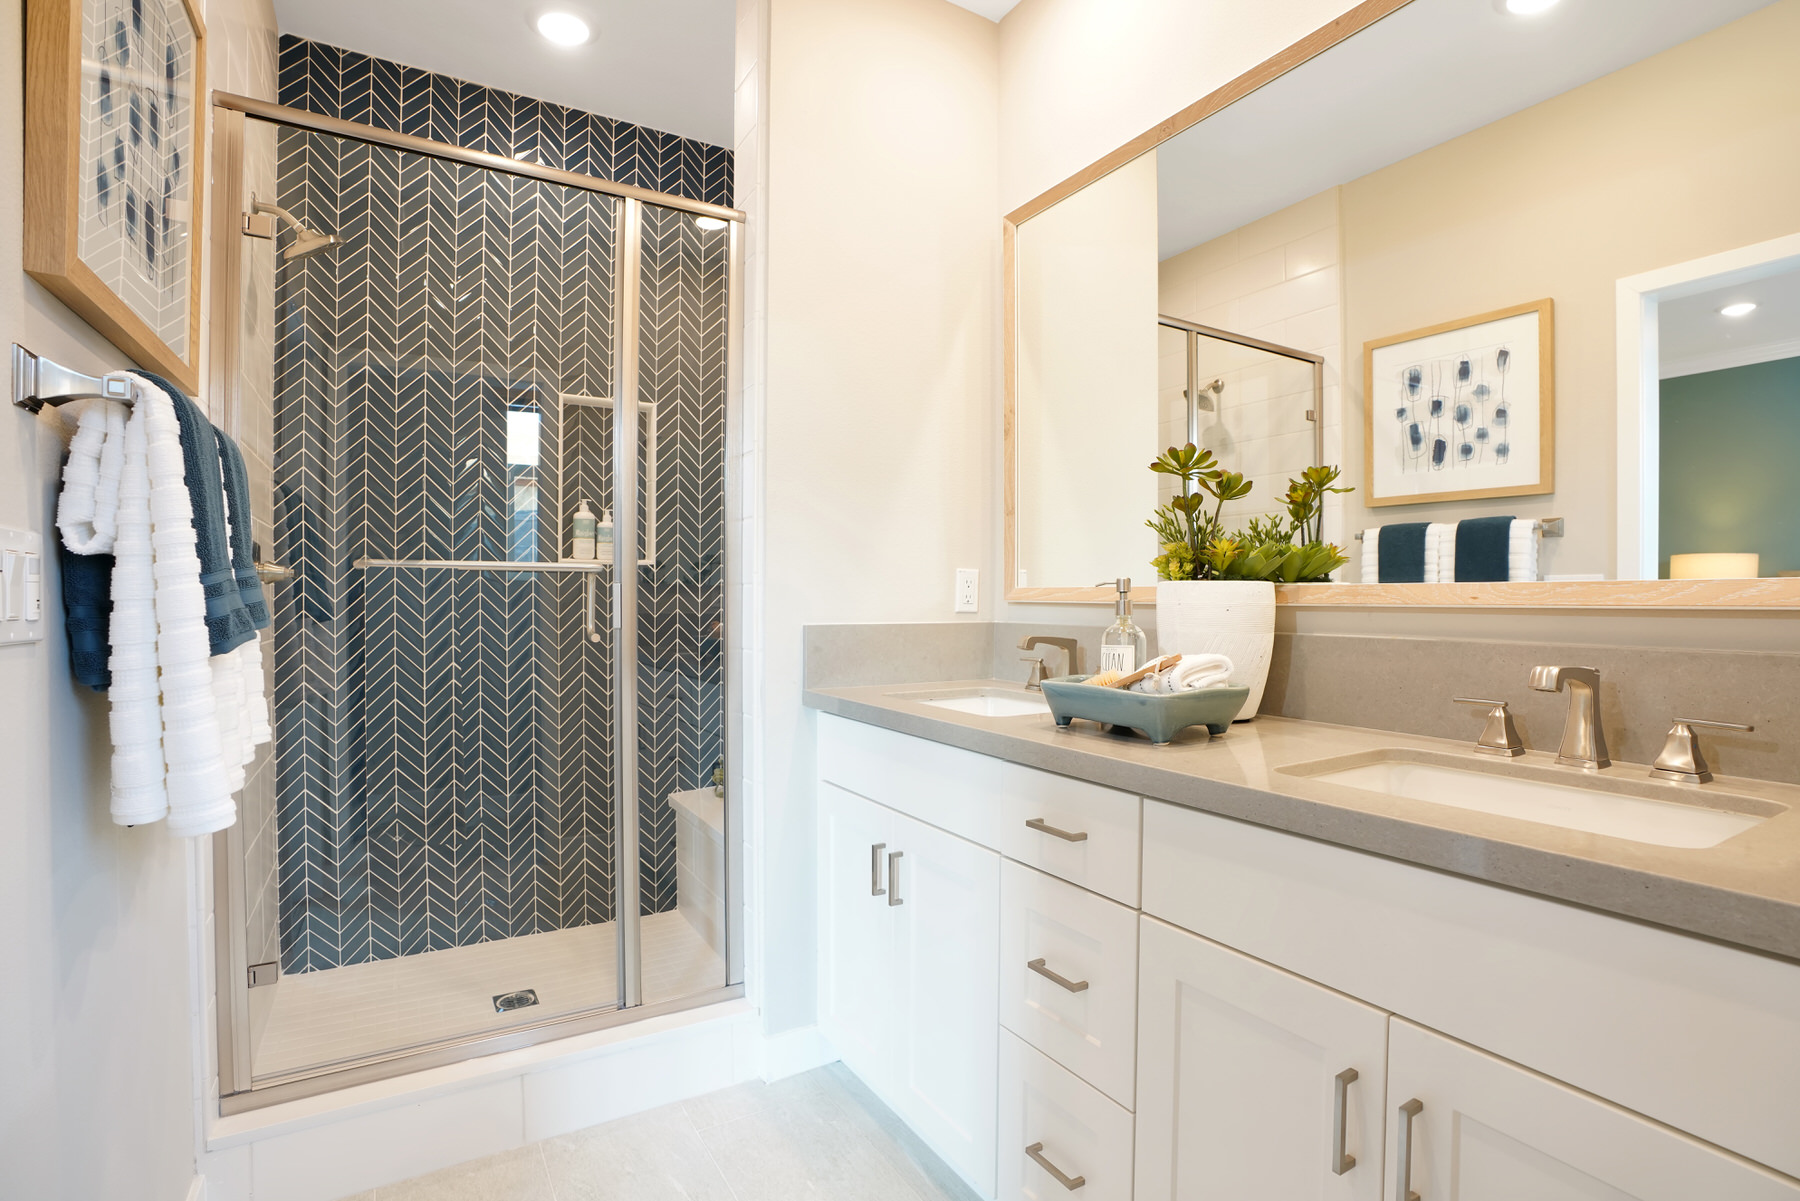 Primary Bath in Plan 2 at Townes at Magnolia by Melia Homes in Anaheim, CA